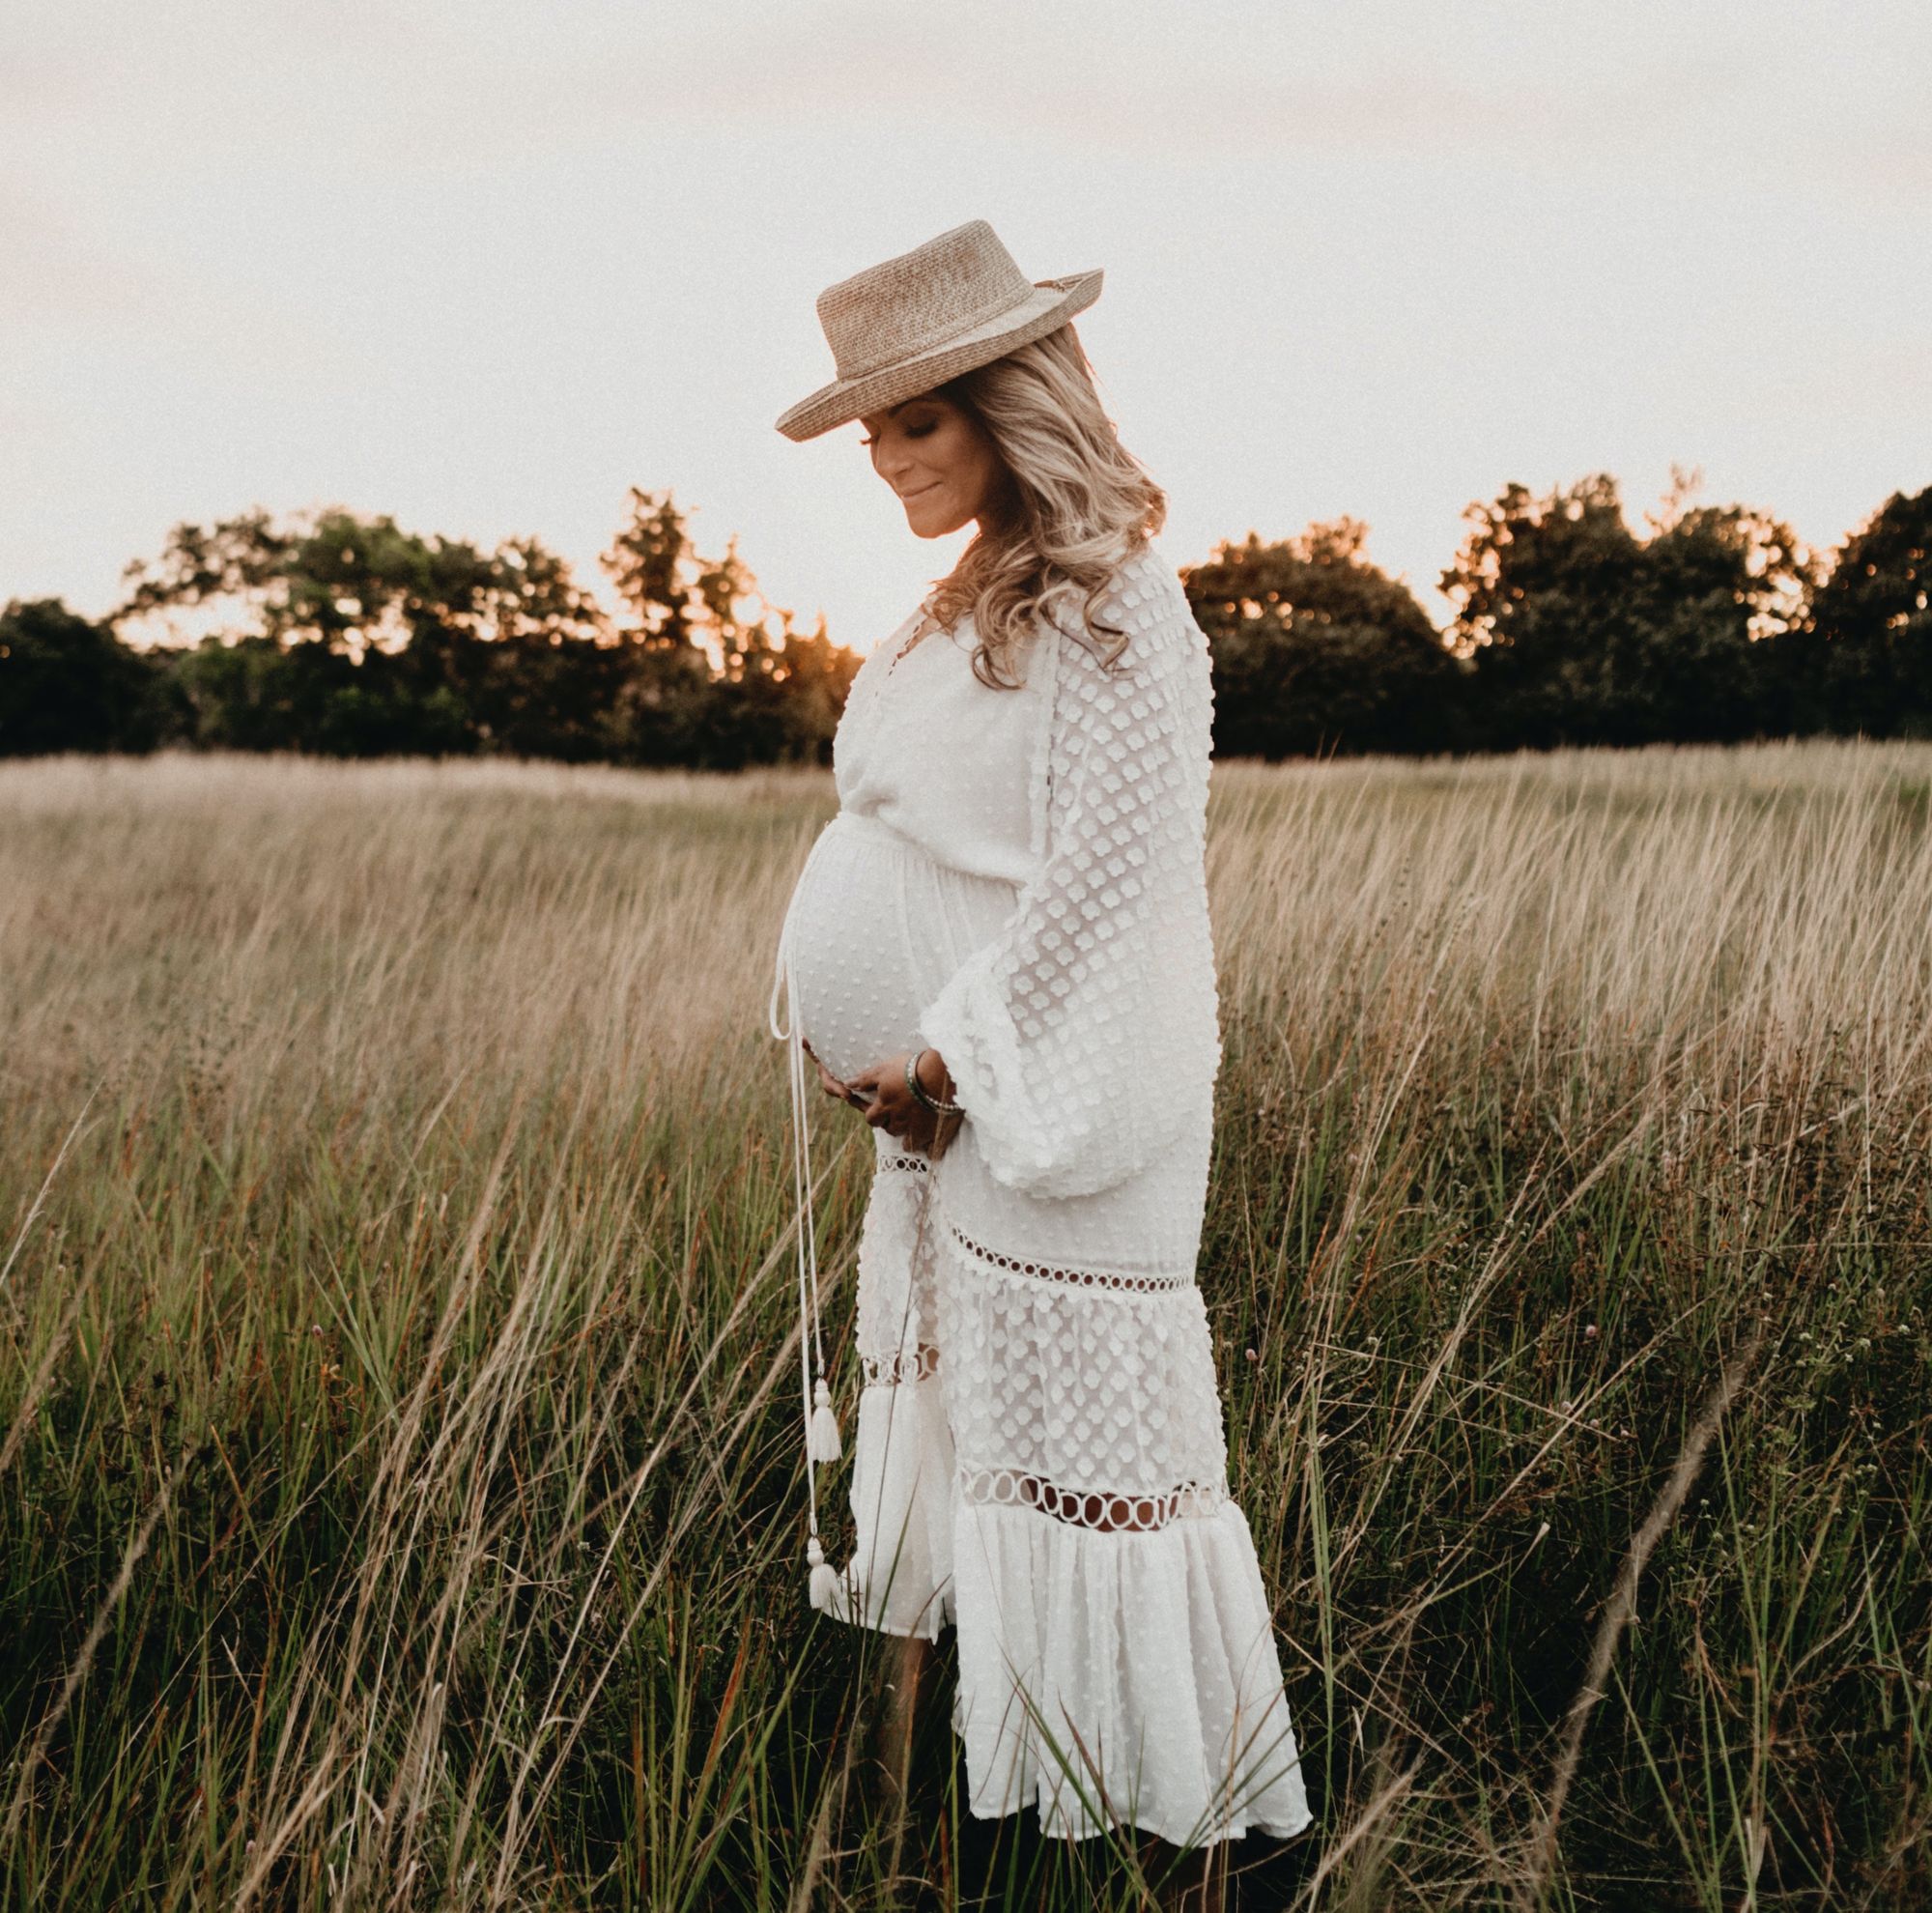 Summer Maternity Clothes – How to Style Your Bump